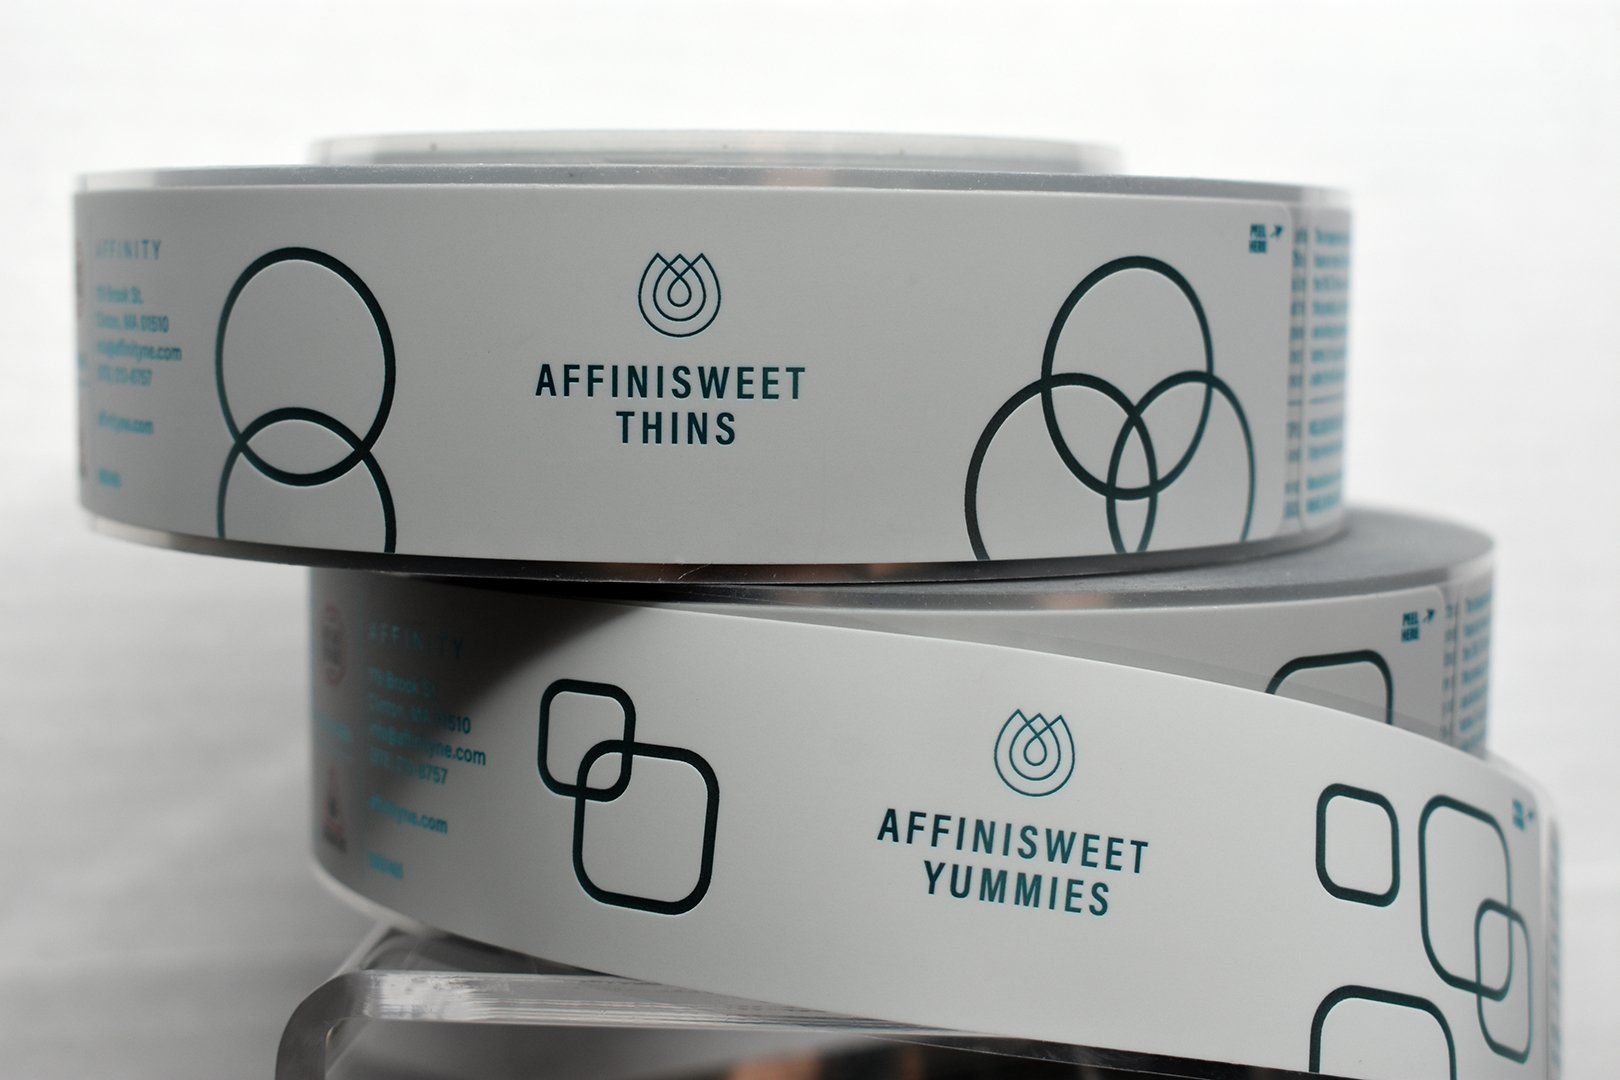 Affinity Thins and Yummies Label Rolls